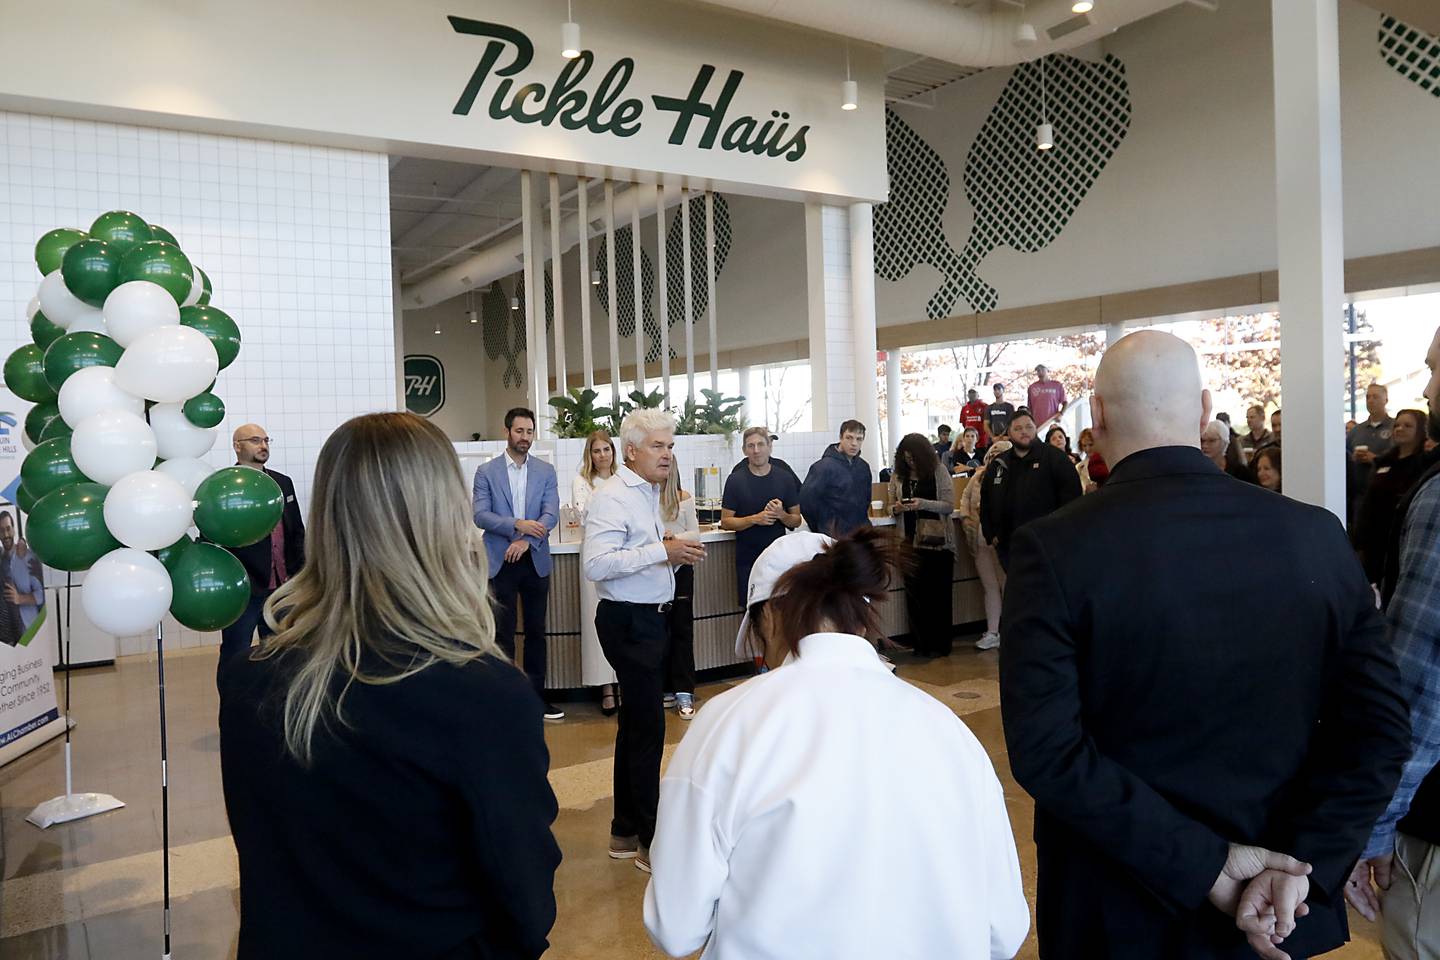 John McLinden welcomes people during a grand opening ceremony for the Pickle Haus in Algonquin, on Friday, Nov. 10, 2023. The Pickle Haus offers indoor pickle ball courts, food and drinks.